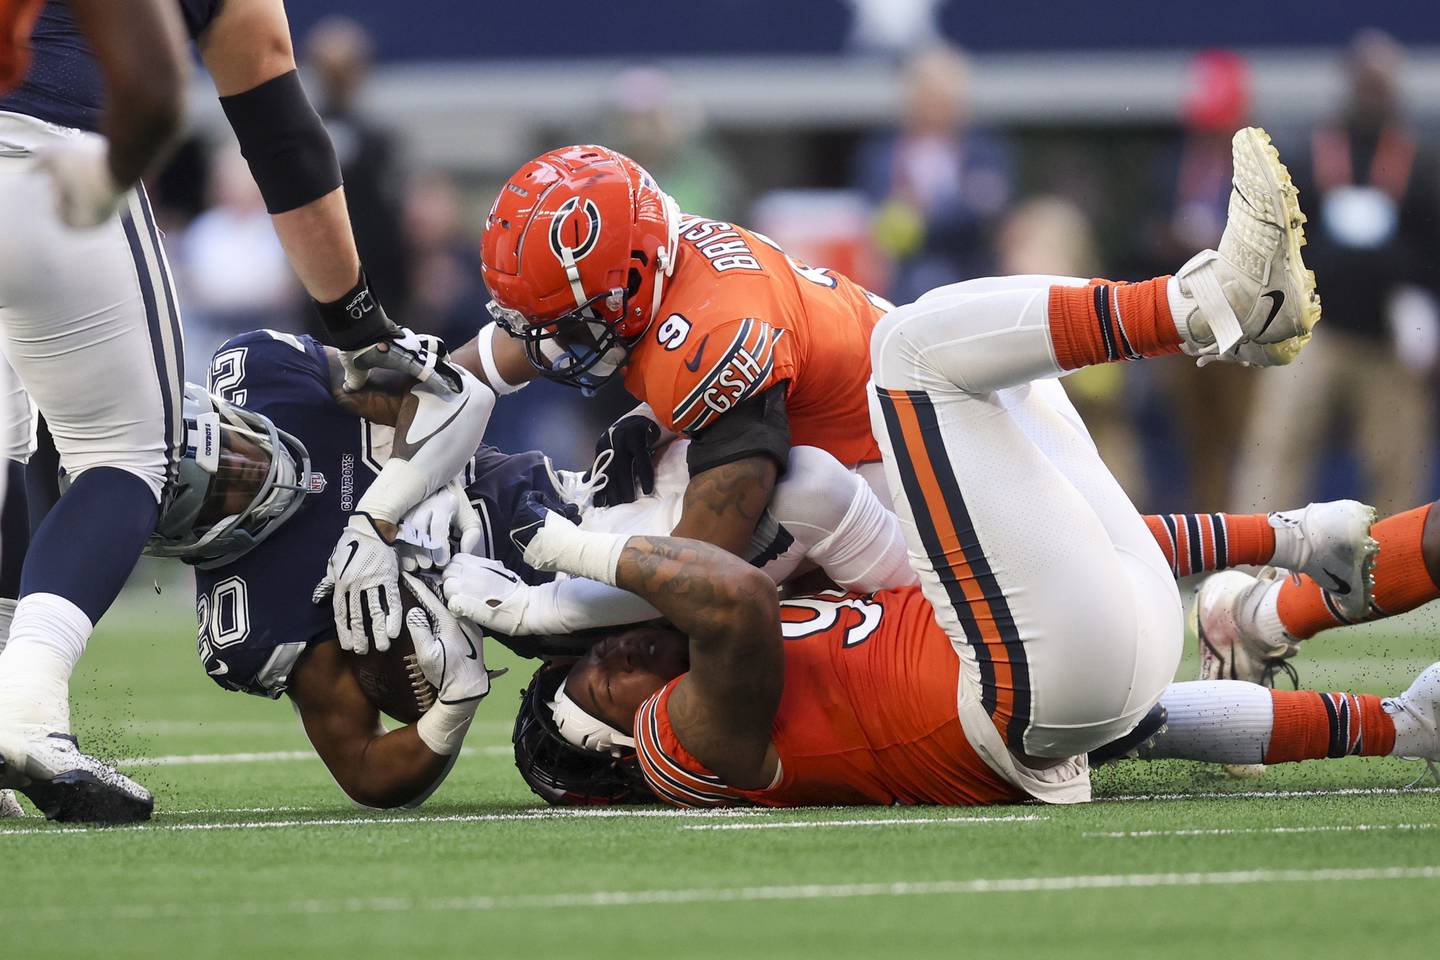 Bears linebacker Trevis Gipson loses his helmet while tackling Cowboys running back Tony Pollard during the second quarter at AT&T Stadium on Oct. 30, 2022.